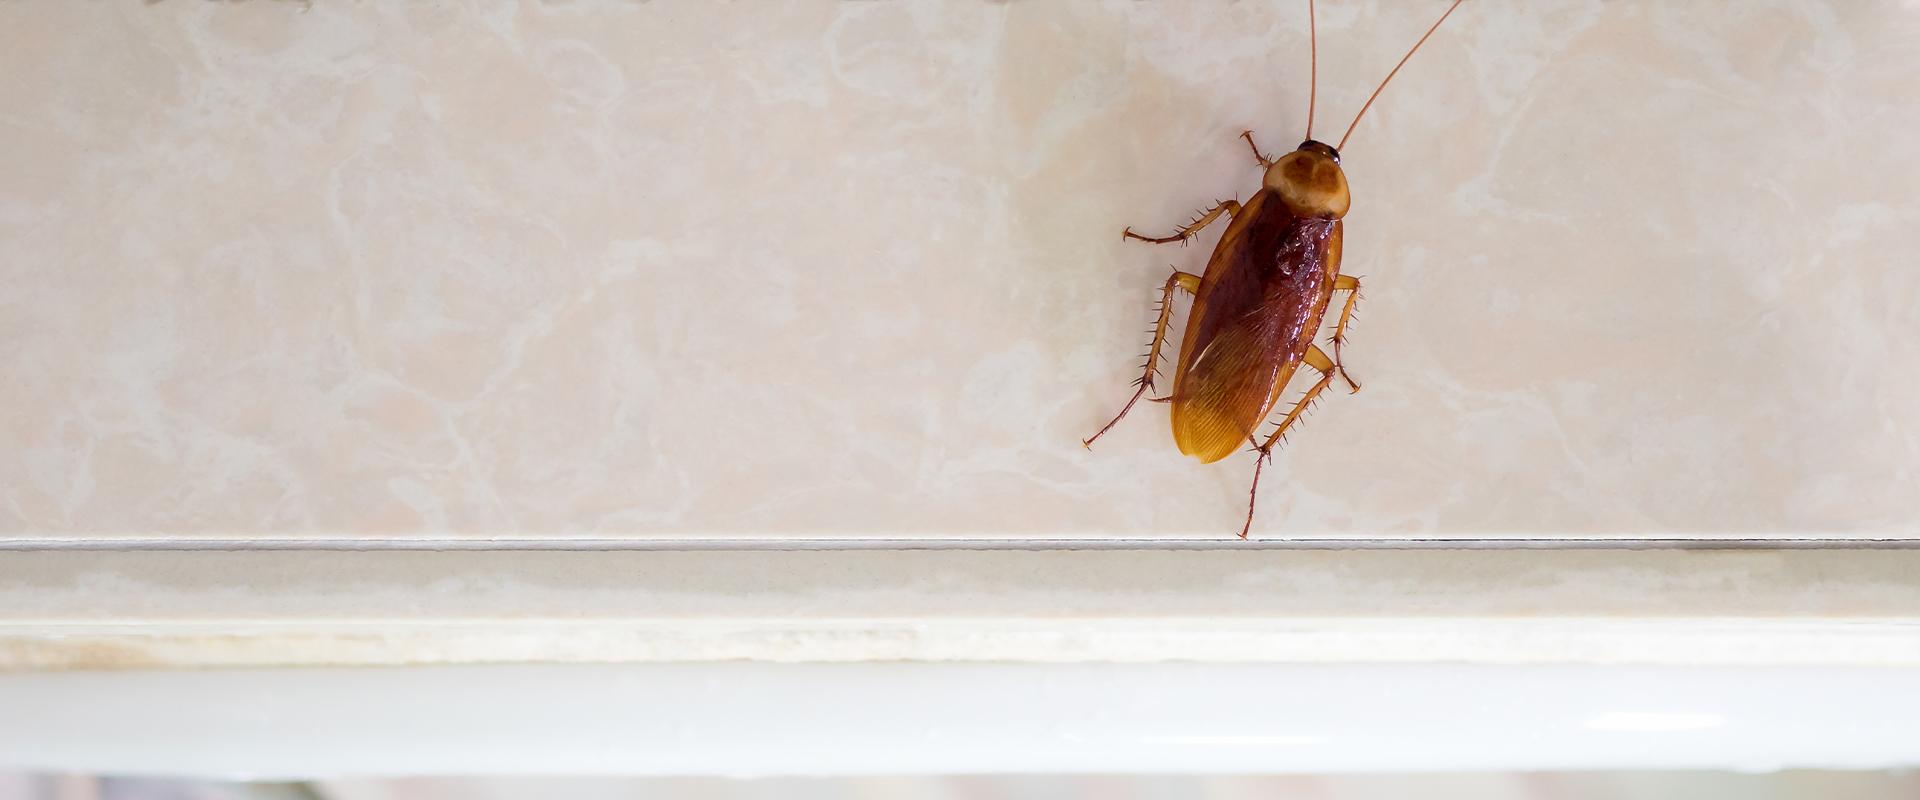 a cockroach crawling on marble